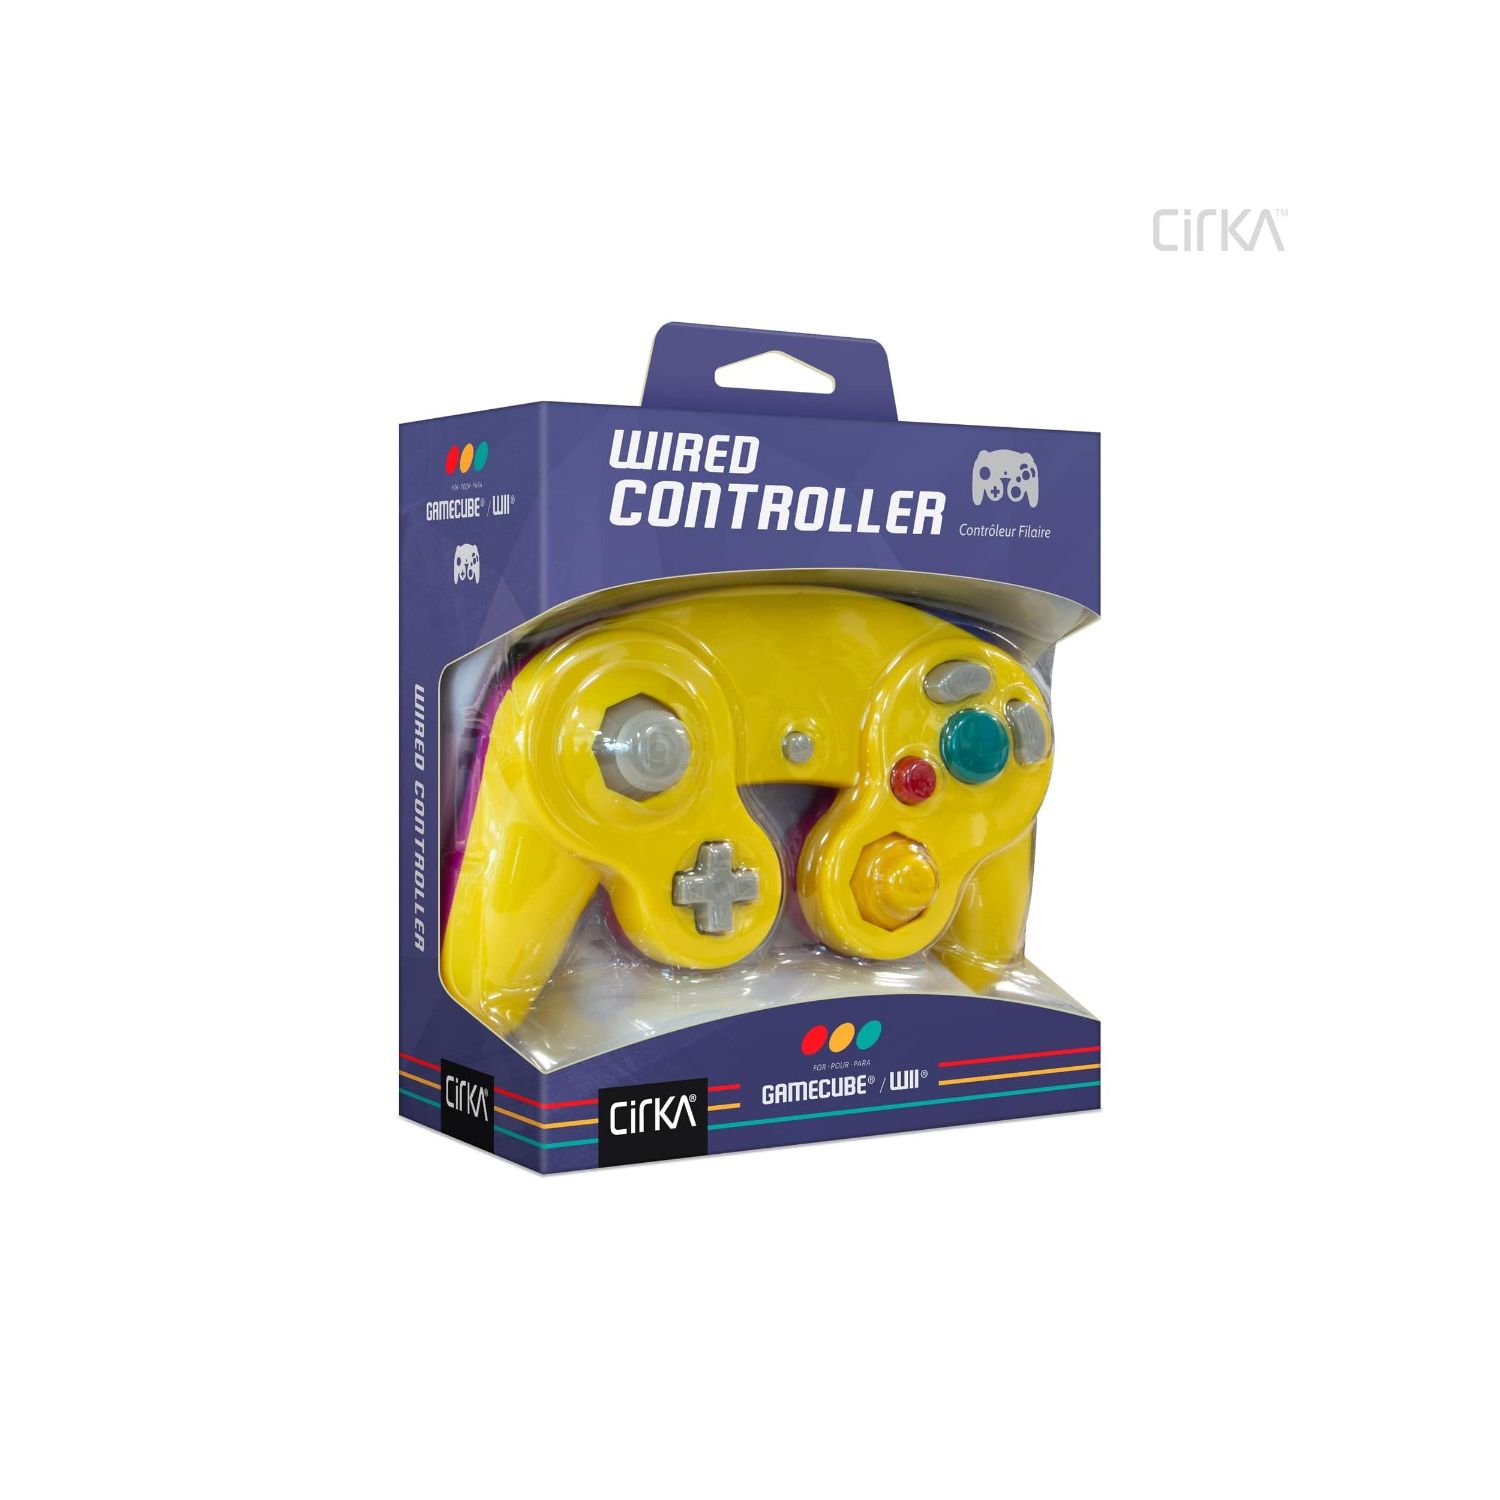 MANETTE AVEC FIL NINTENDO GAMECUBE NGC WII WIRED CONTROLLER CIRKA - jeux video game-x